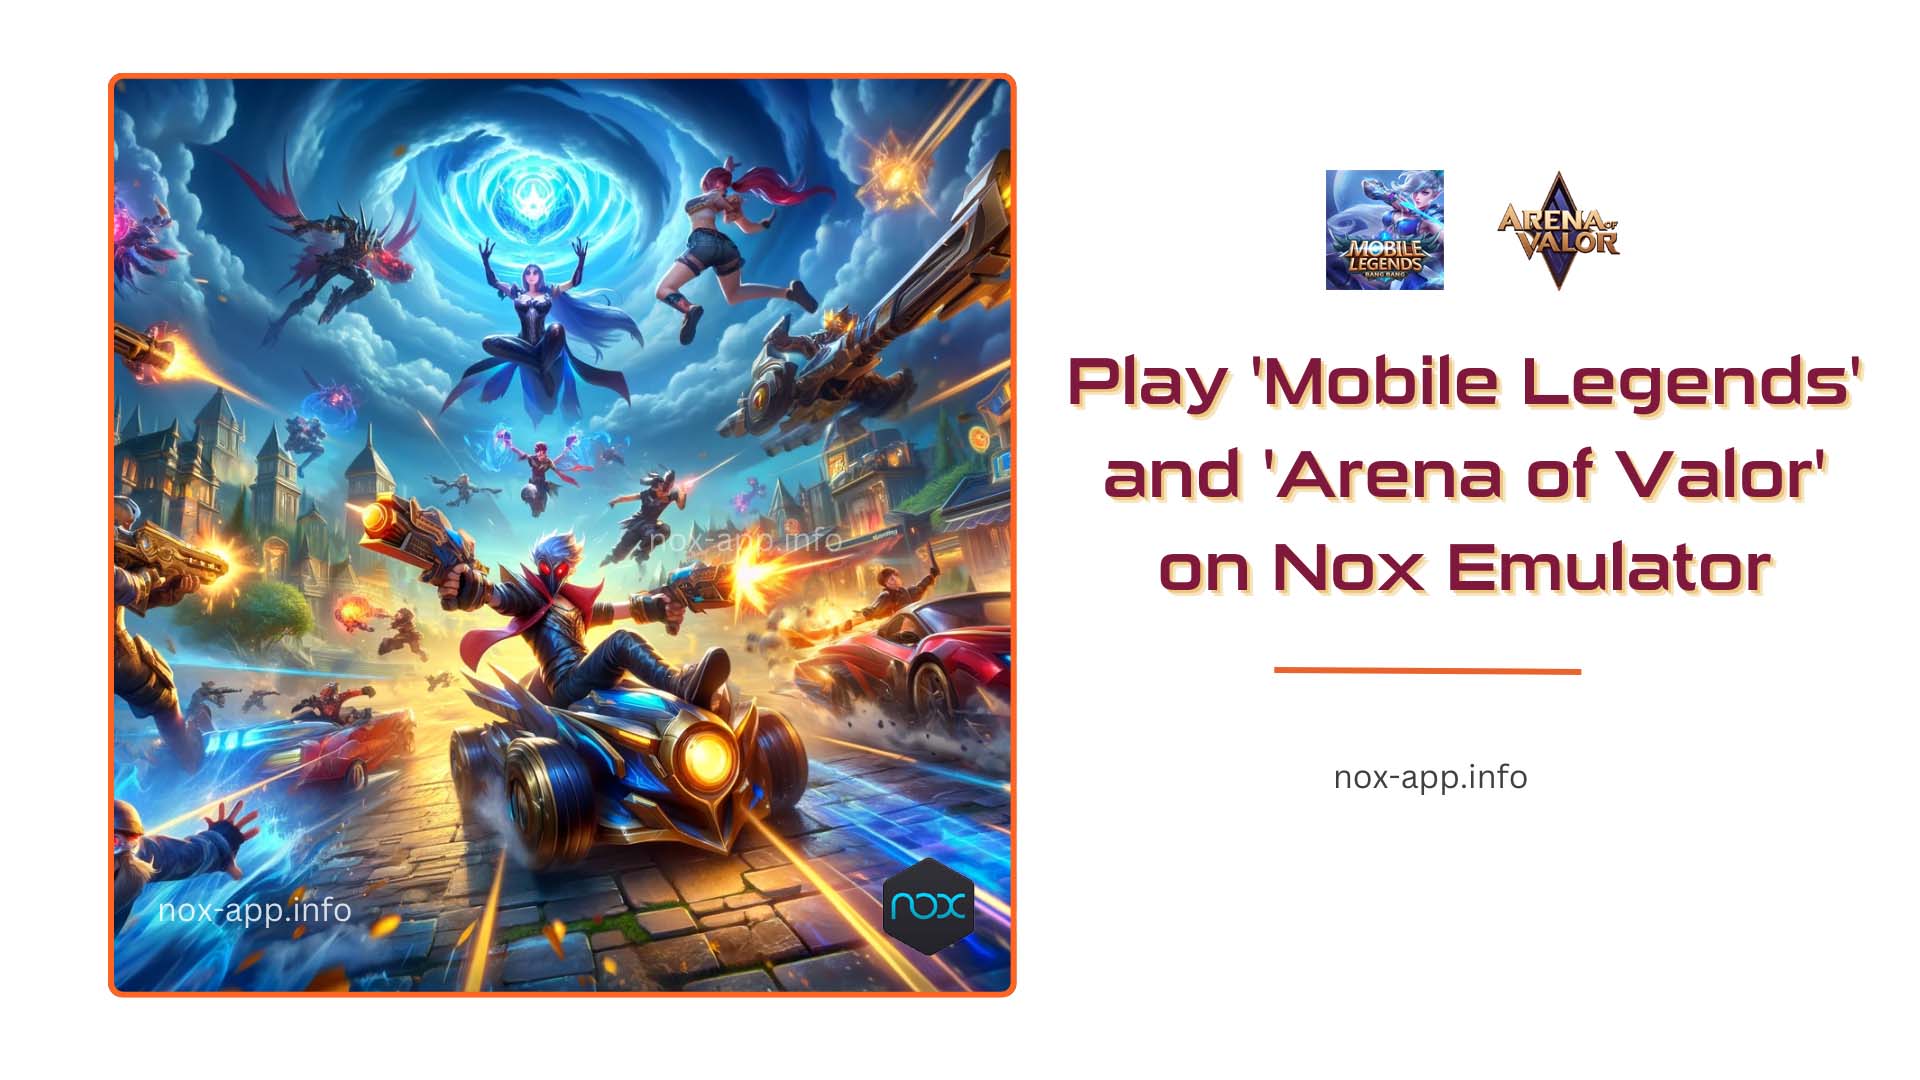 mobile legends and arena of valor play on nox